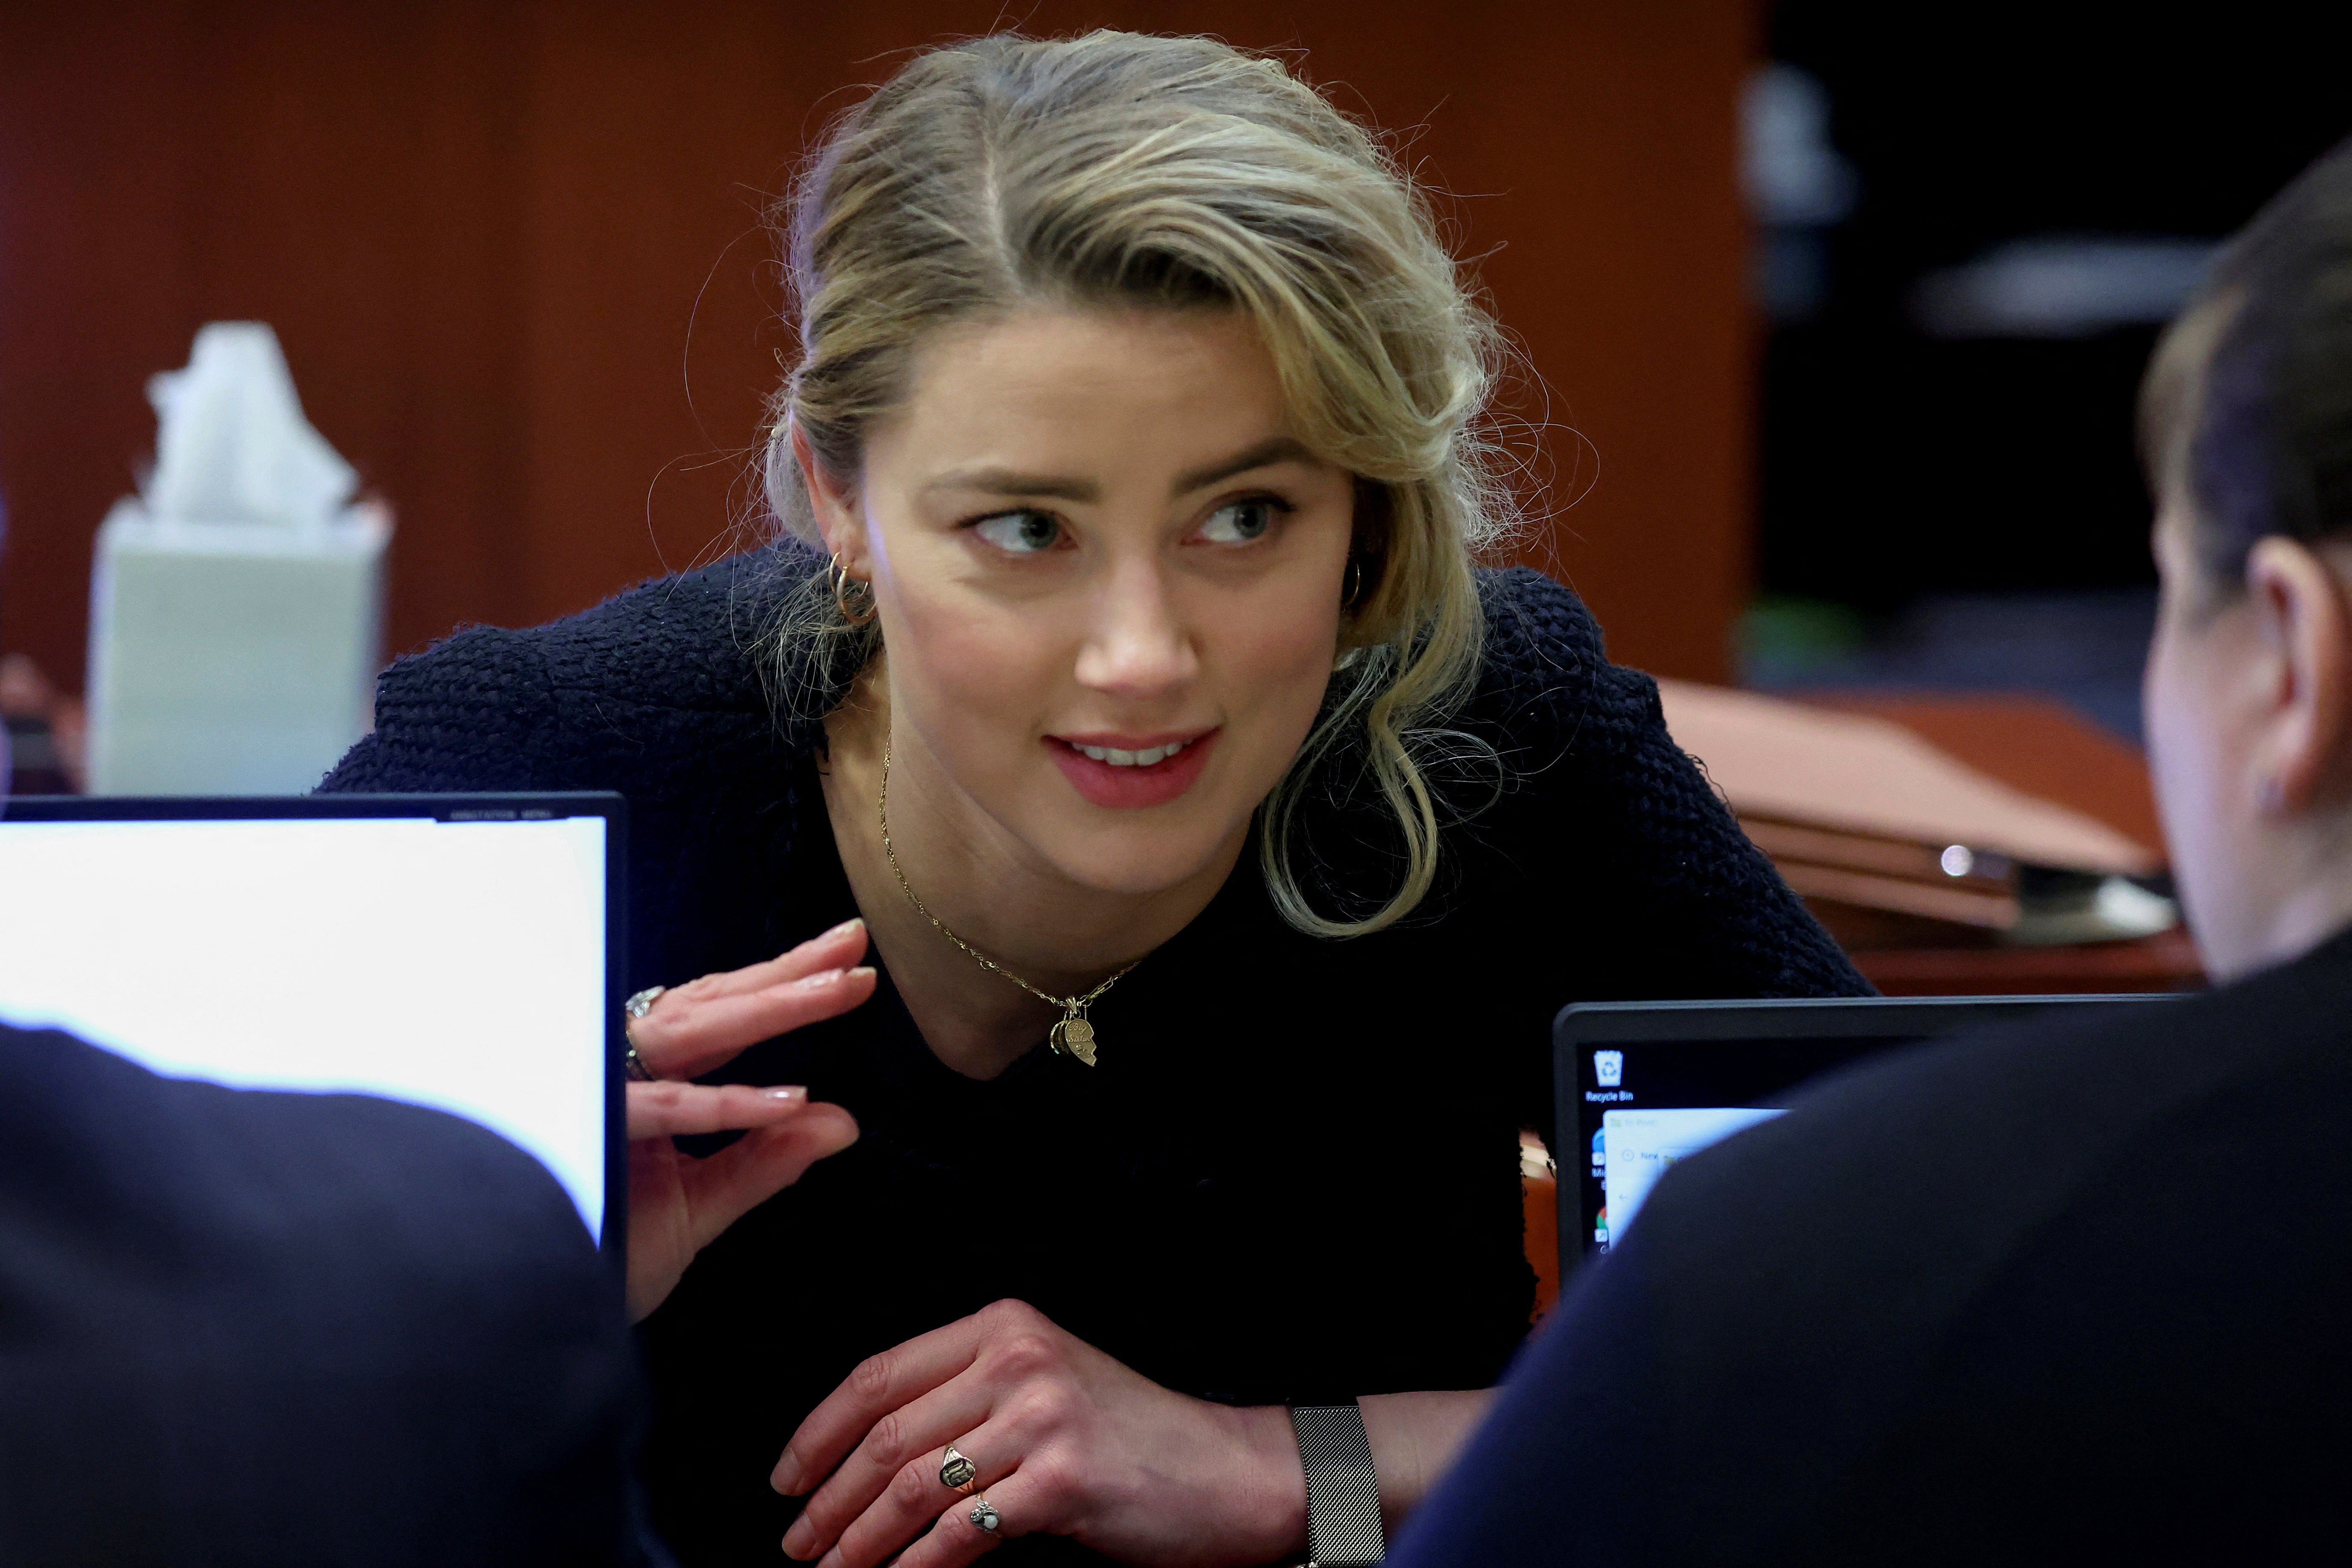 Amber Heard speaks to her legal team during her ex-husband Johnny Depp's defamation trial against her, at the Fairfax County Circuit Courthouse in Fairfax, Virginia, US on 28 April